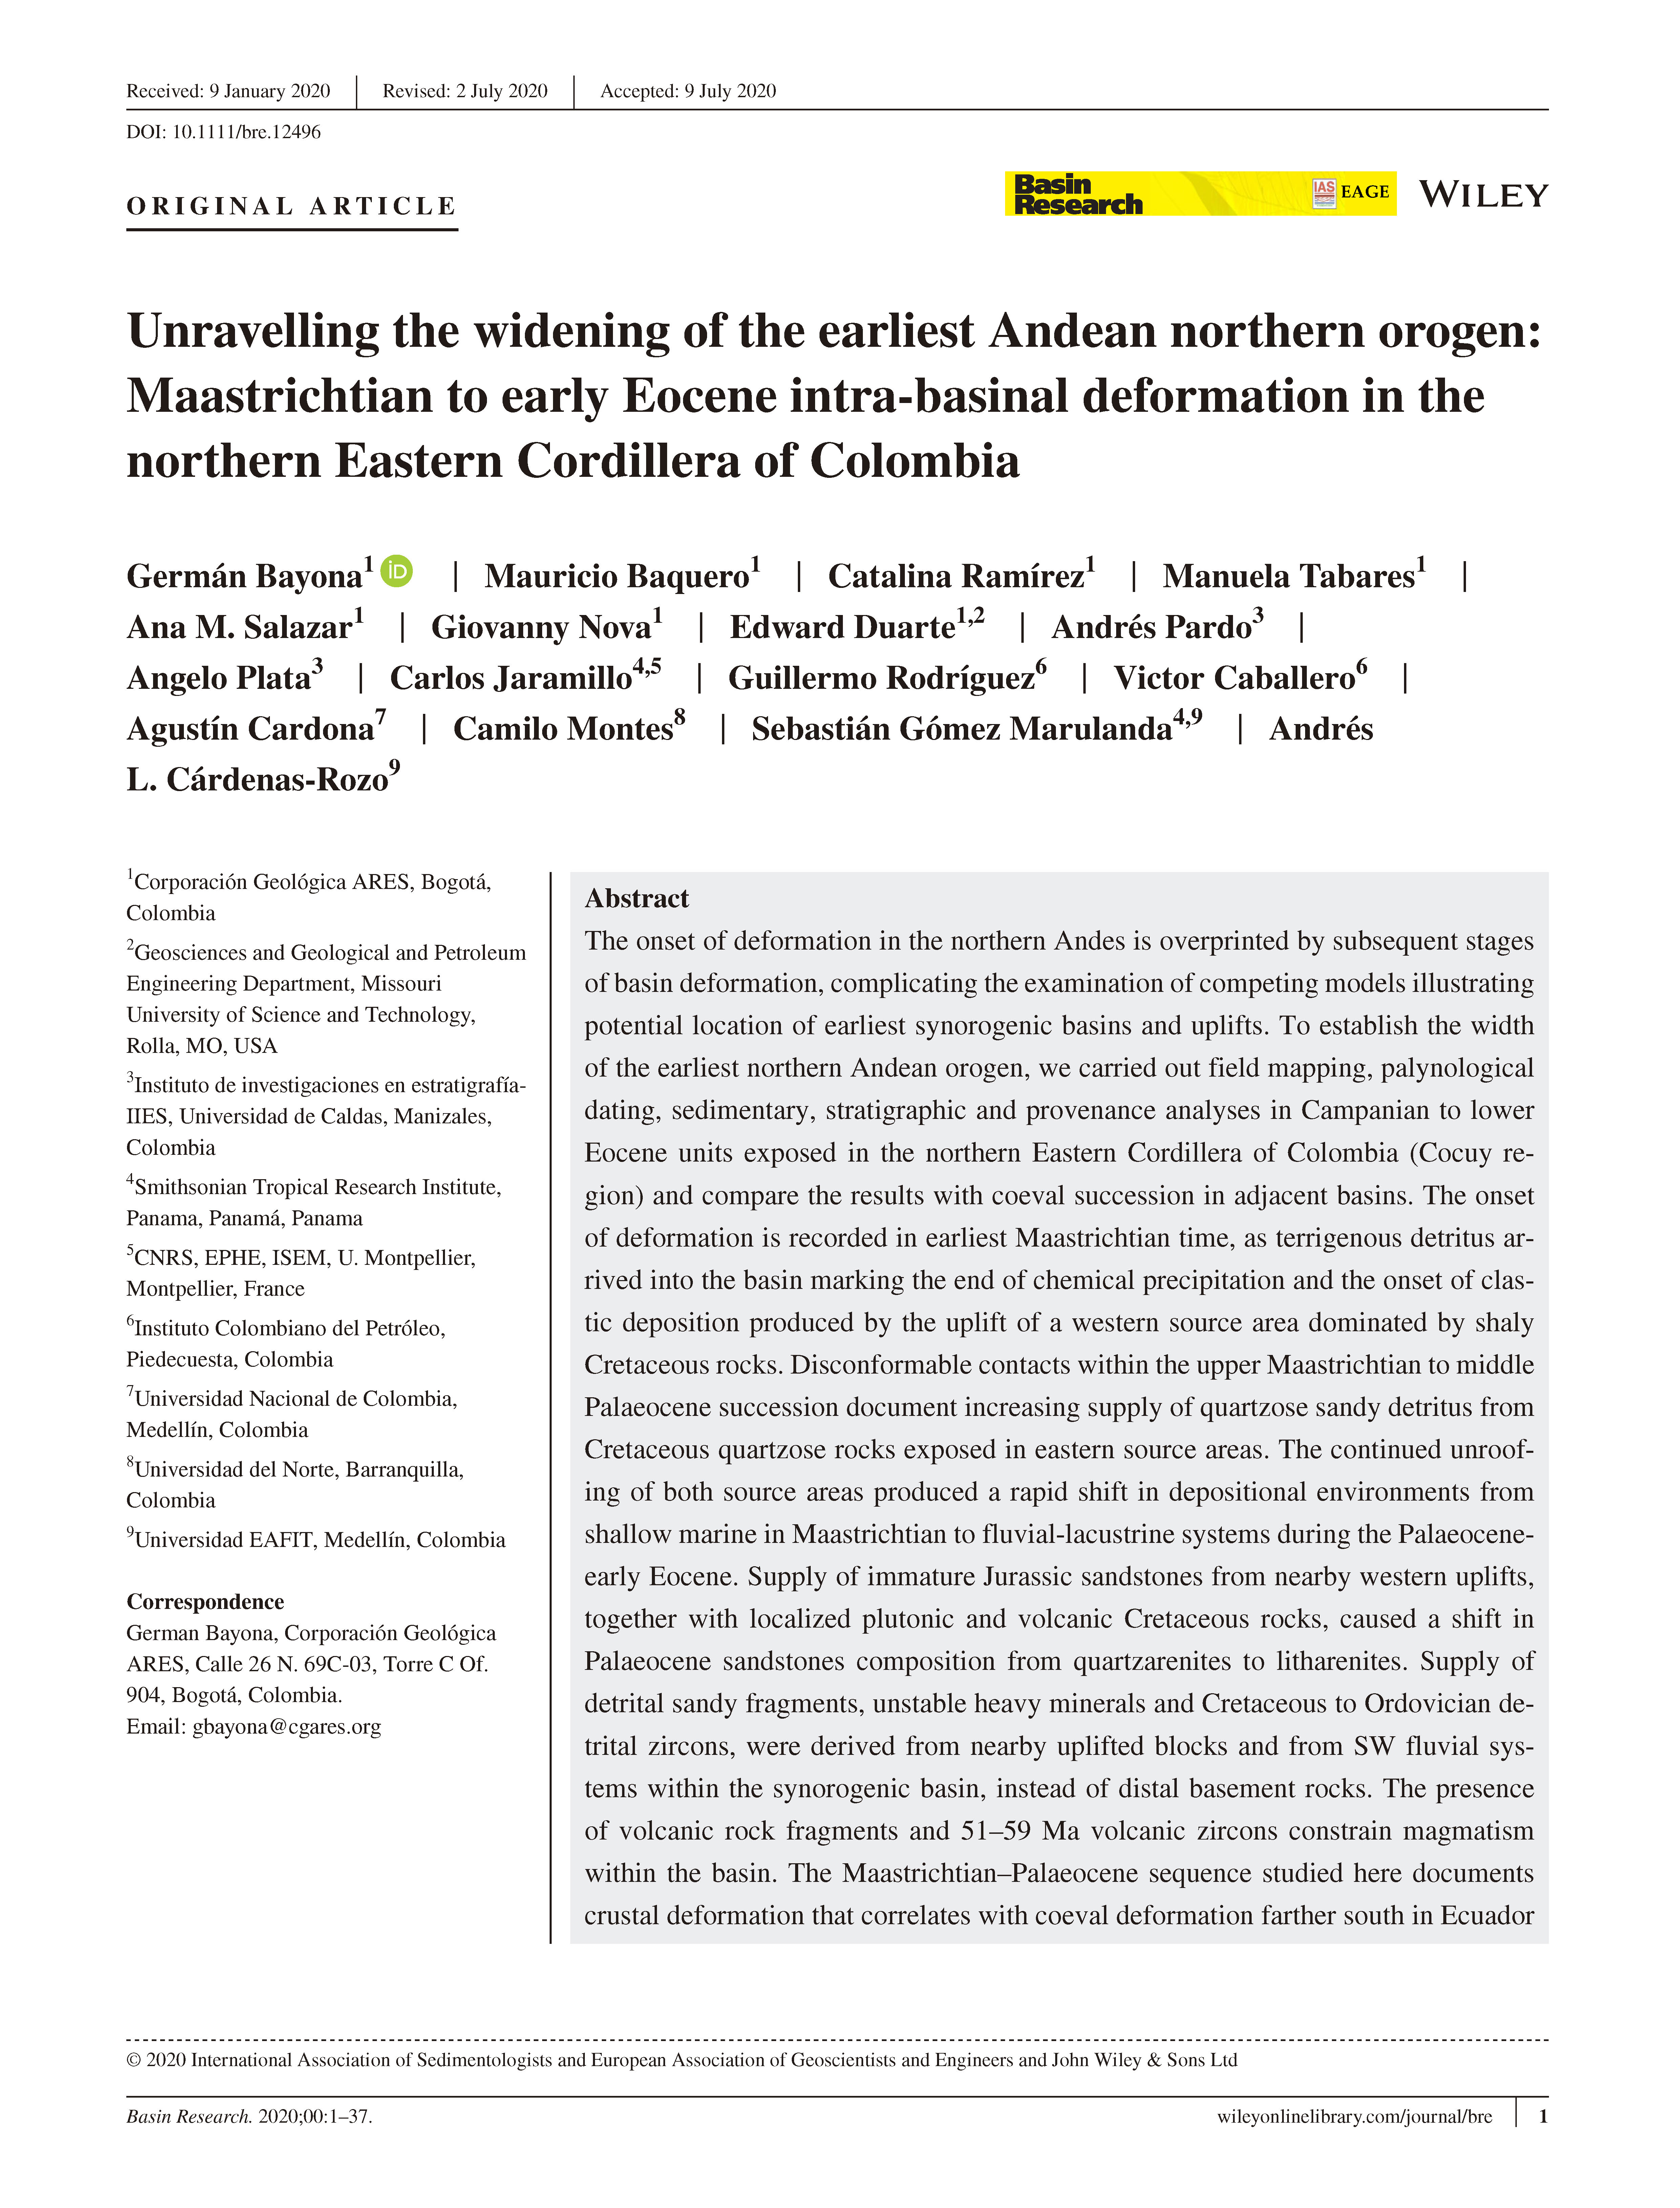 Lee mÃ¡s sobre el artÃ­culo Unravelling the widening of the earliest Andean northern orogen: Maastrichtian to early Eocene intra-basinal deformation in the northern Eastern Cordillera of Colombia â”‚ 2020